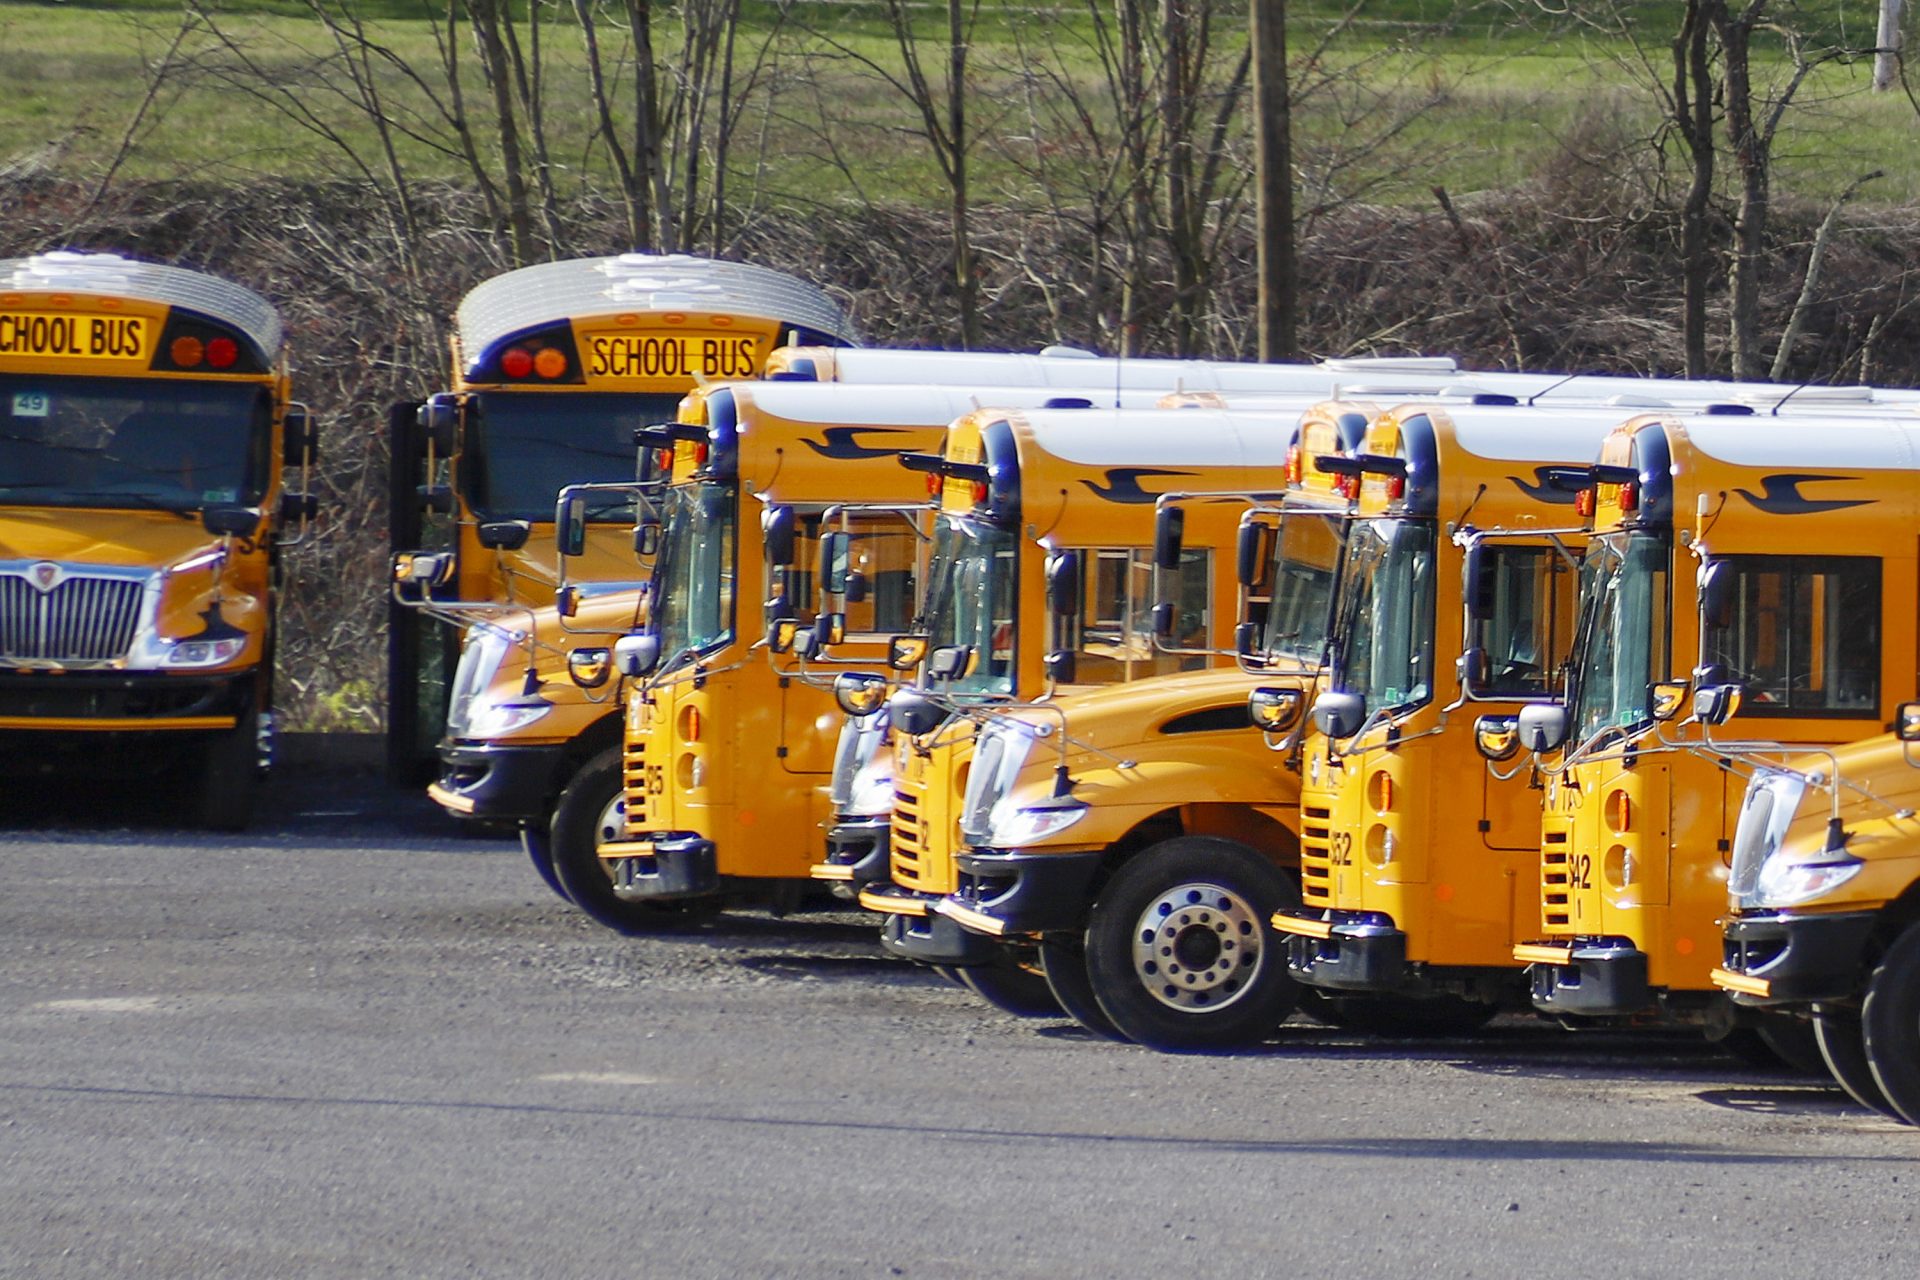 School buses are parked at a depot Thursday, April 9, 2020, in Zelienople, Pa. Pennsylvania Gov. Tom Wolf said Thursday that schools will remain shuttered for the rest of the academic year because of the coronavirus pandemic.